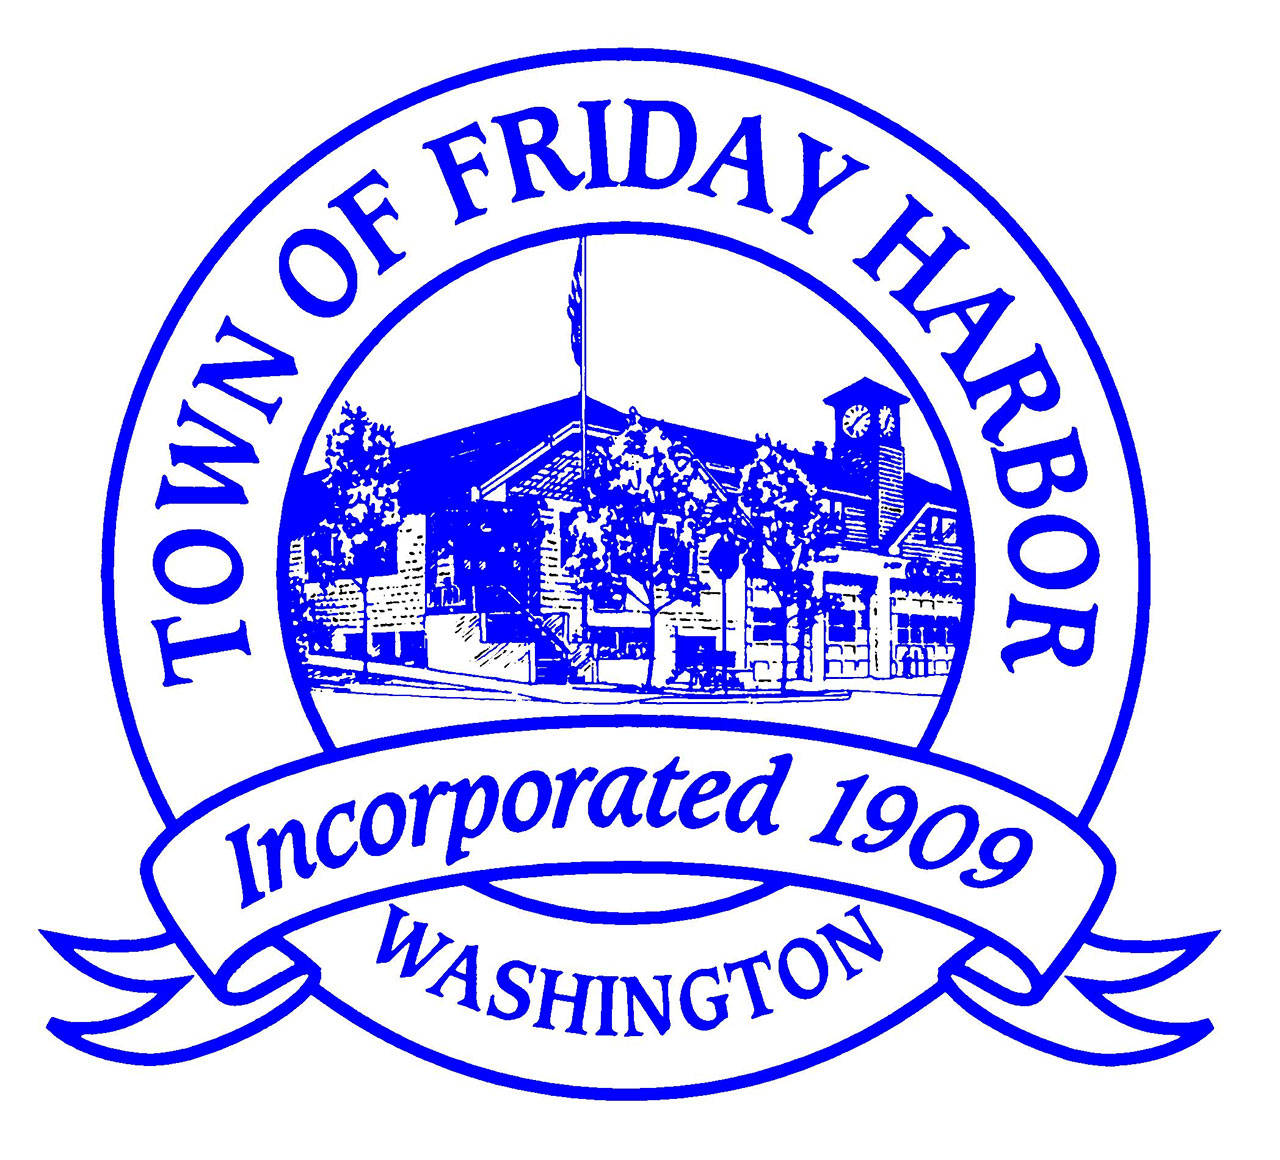 Recycle Christmas trees in Friday Harbor on Jan. 10